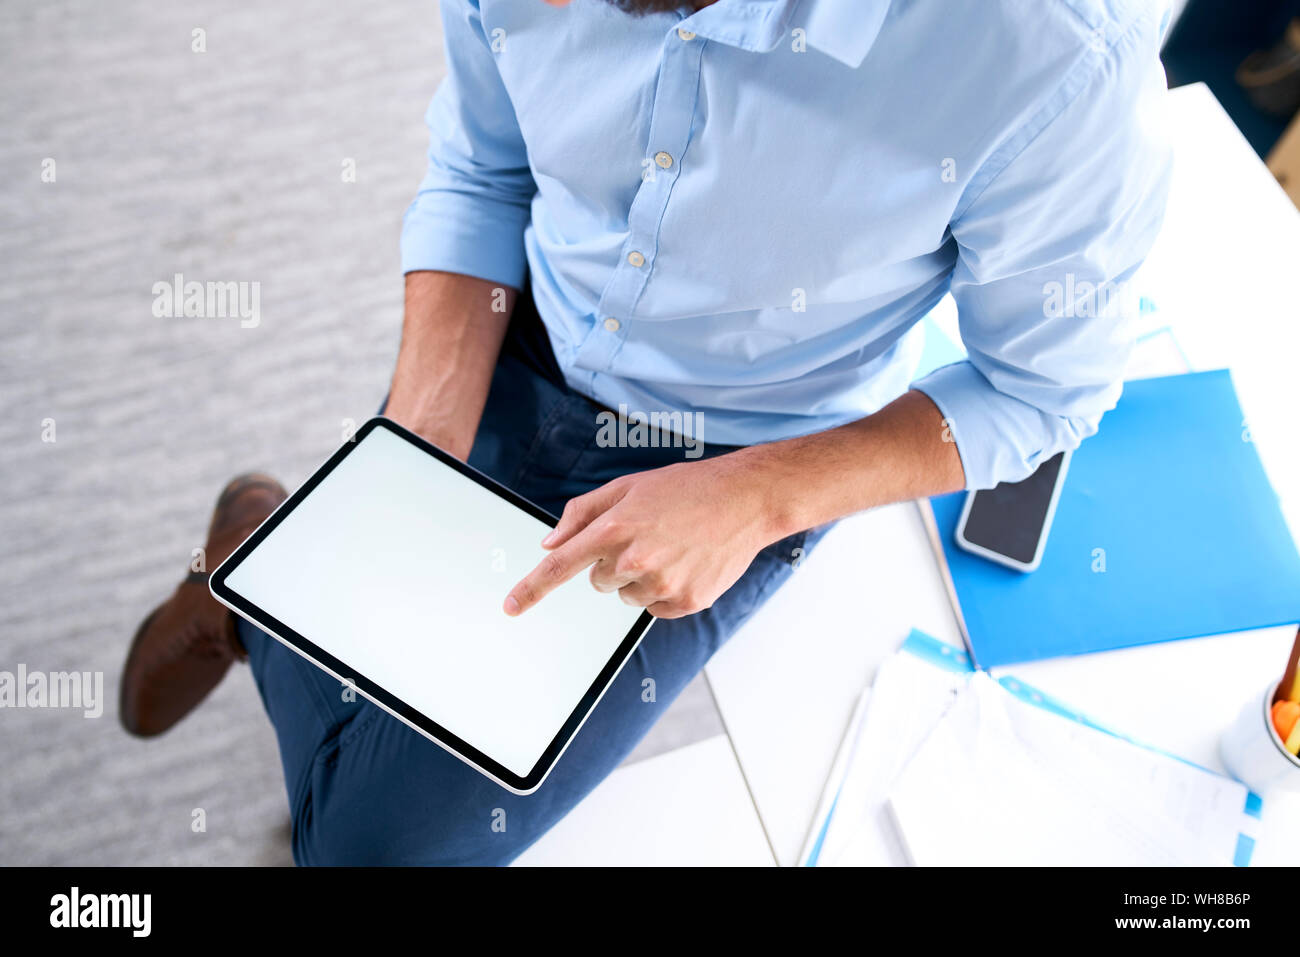 Overhead view of a businessman using a digital tablet Stock Photo